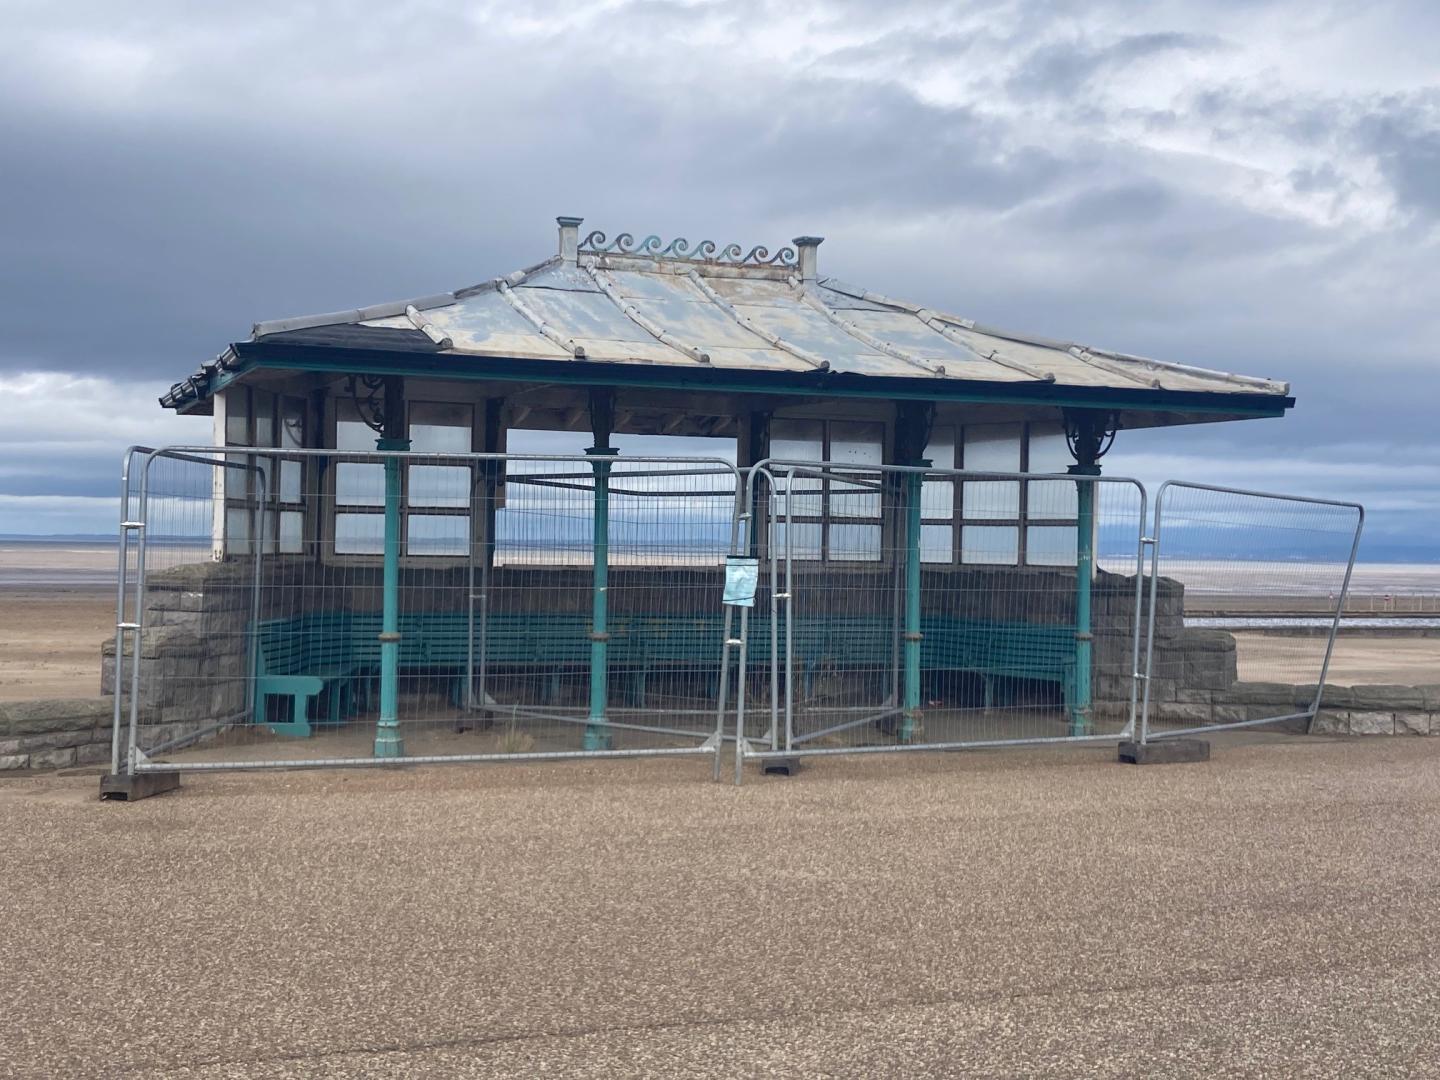 One of three Victorian seafront shelters in Weston-super-Mare surrounded by metal barriers with the beach in the background.